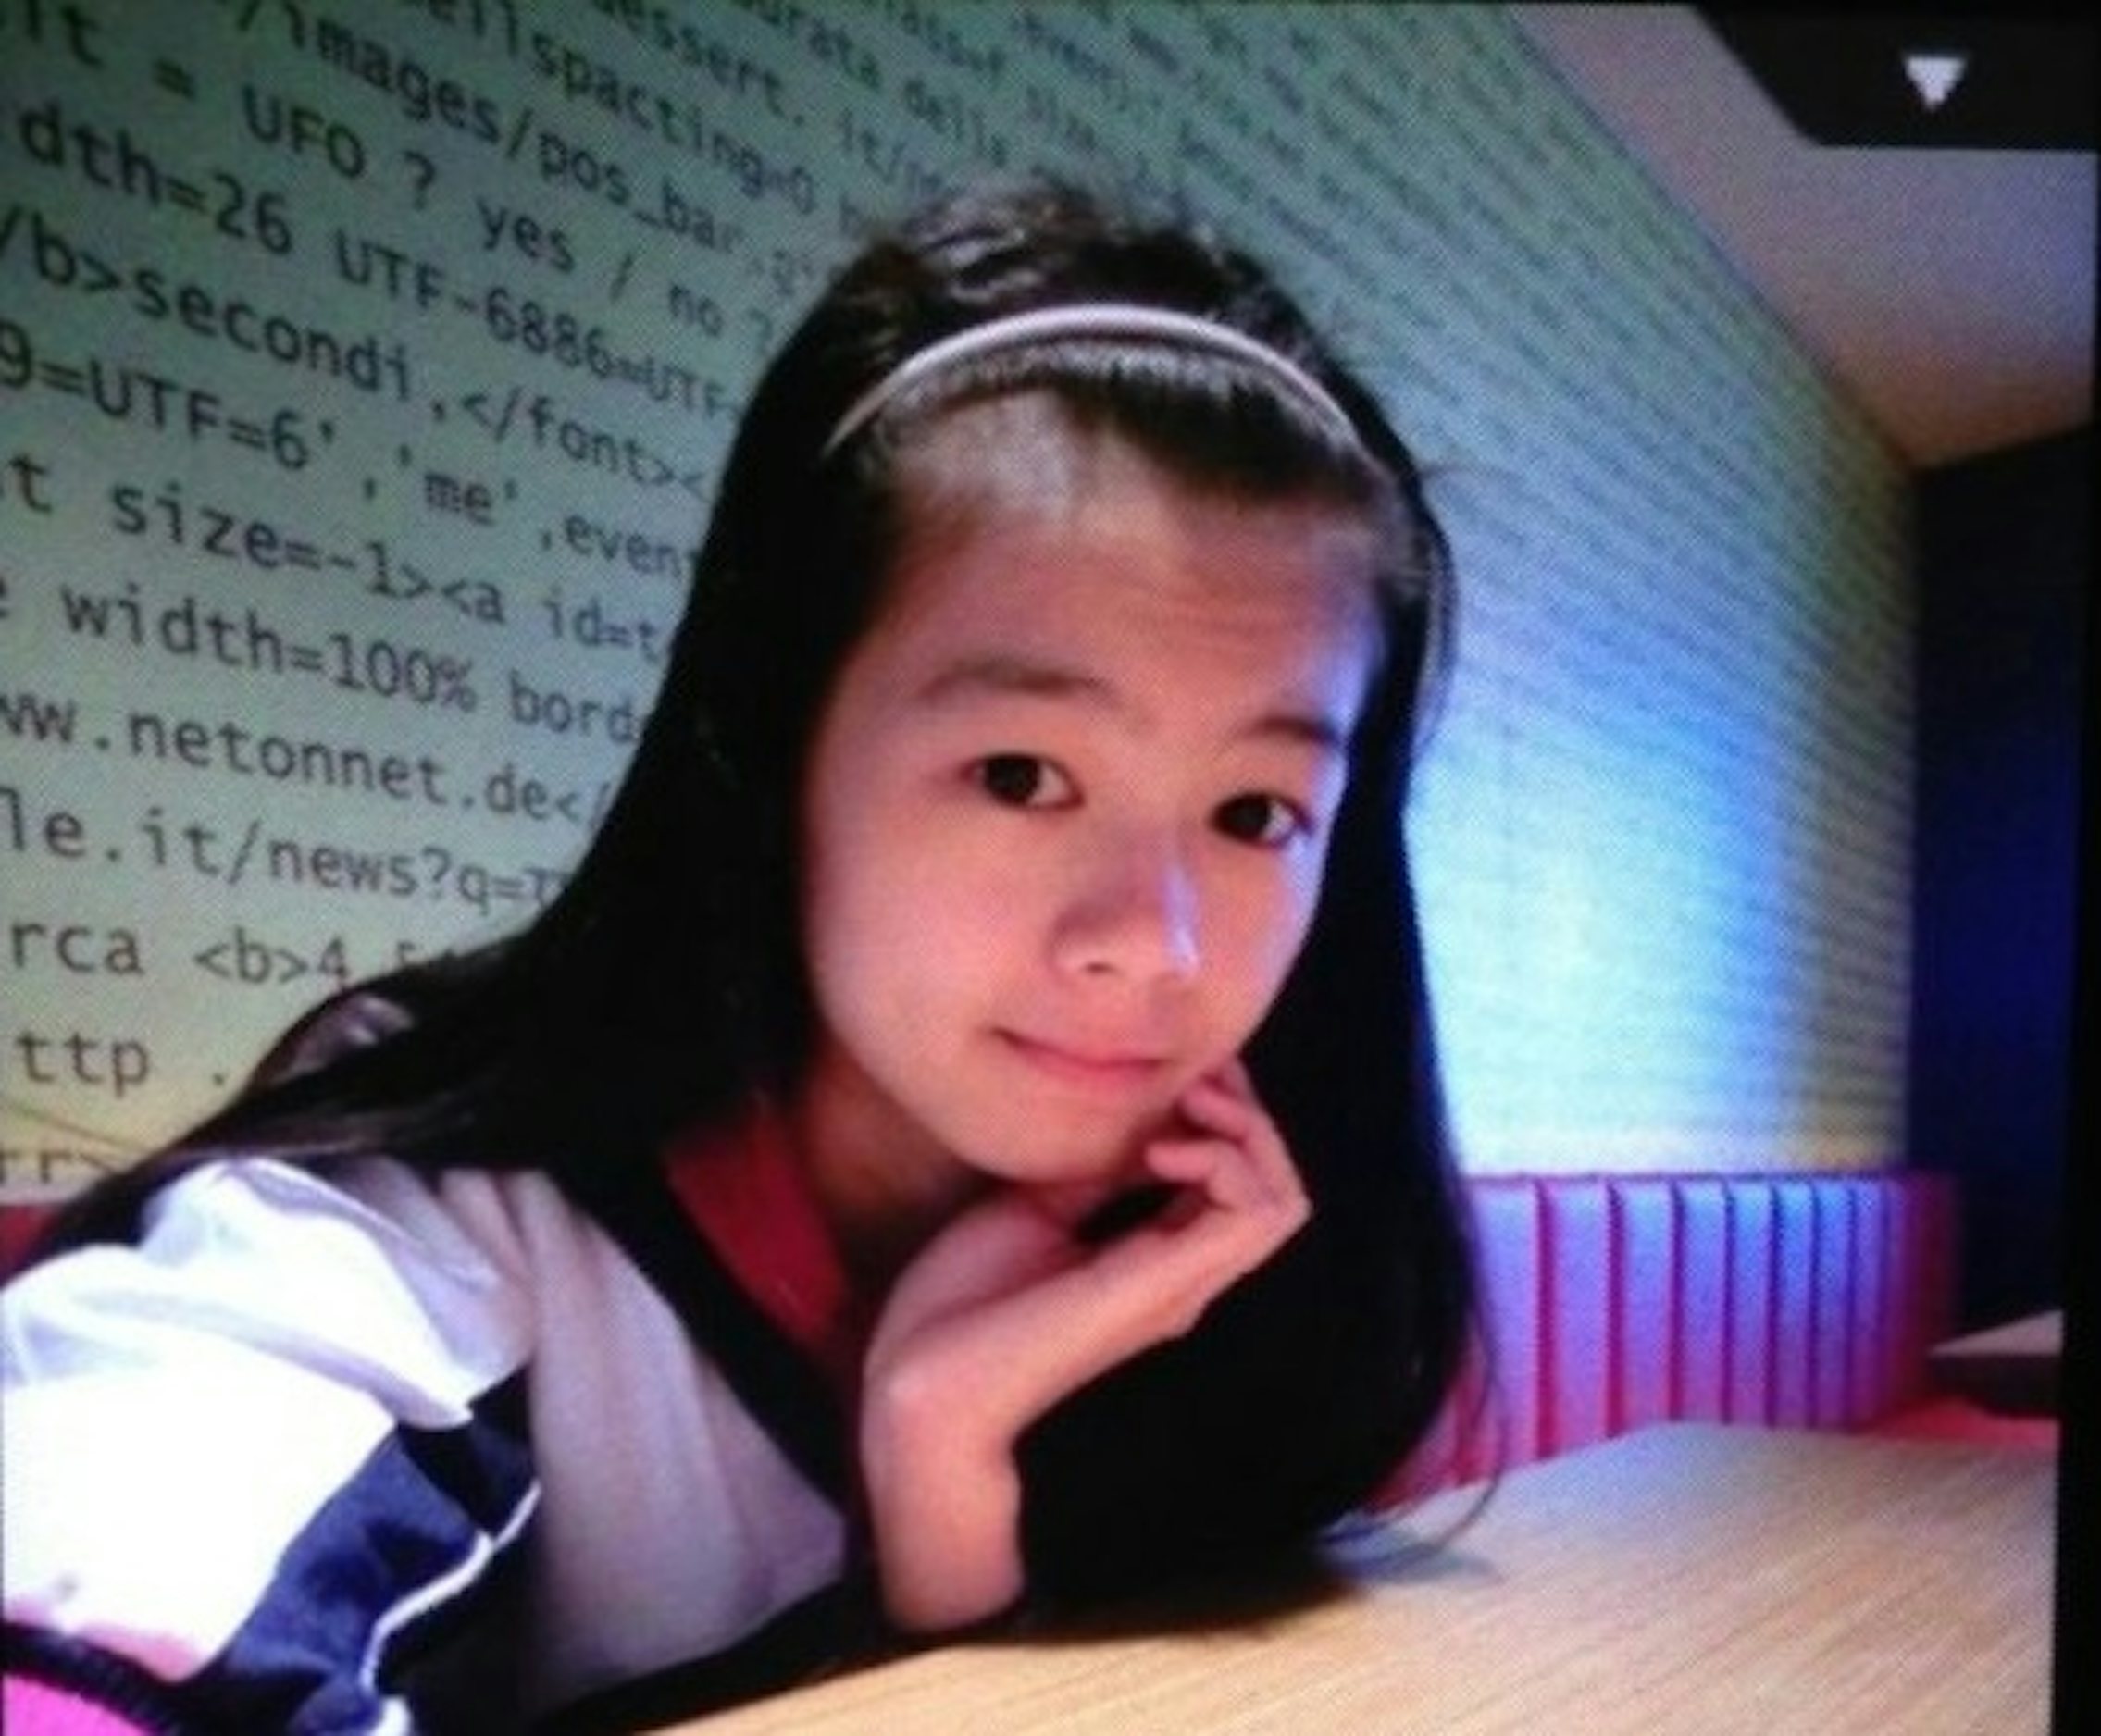 Did China S Twitter Play A Role In This Teenage Girl S Murder The Daily Dot